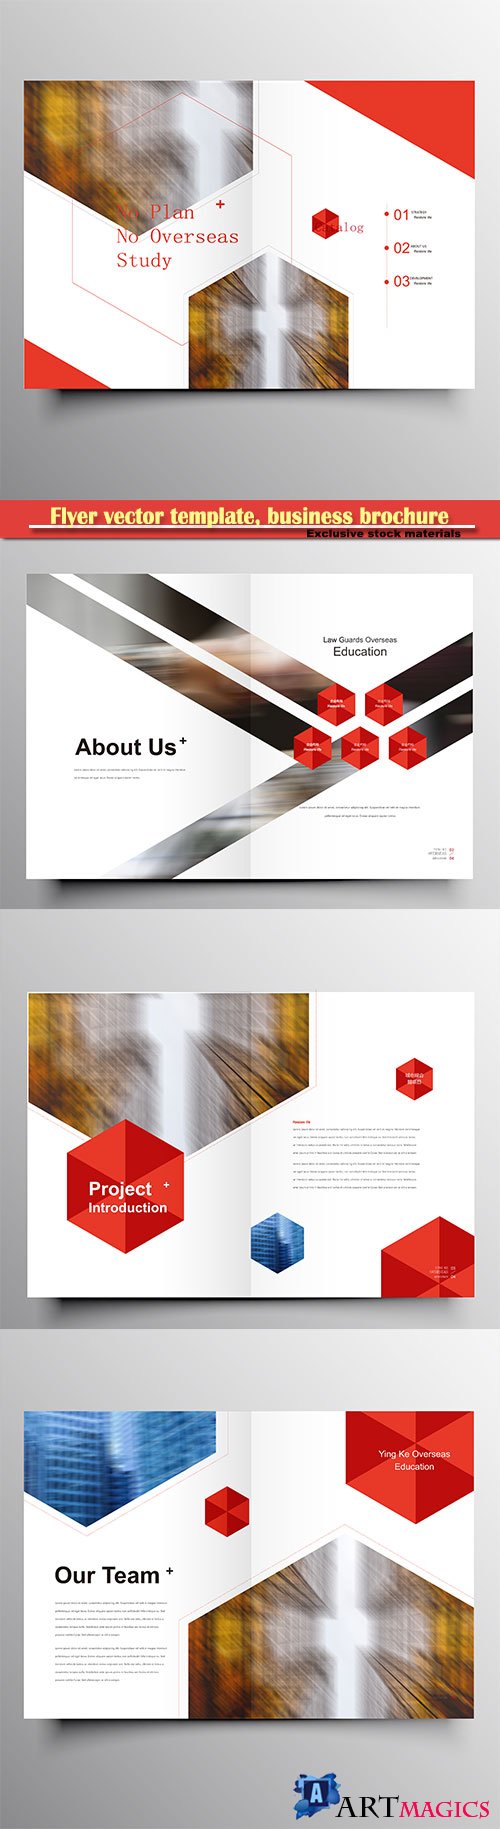 Flyer vector template, business brochure, magazine cover # 34